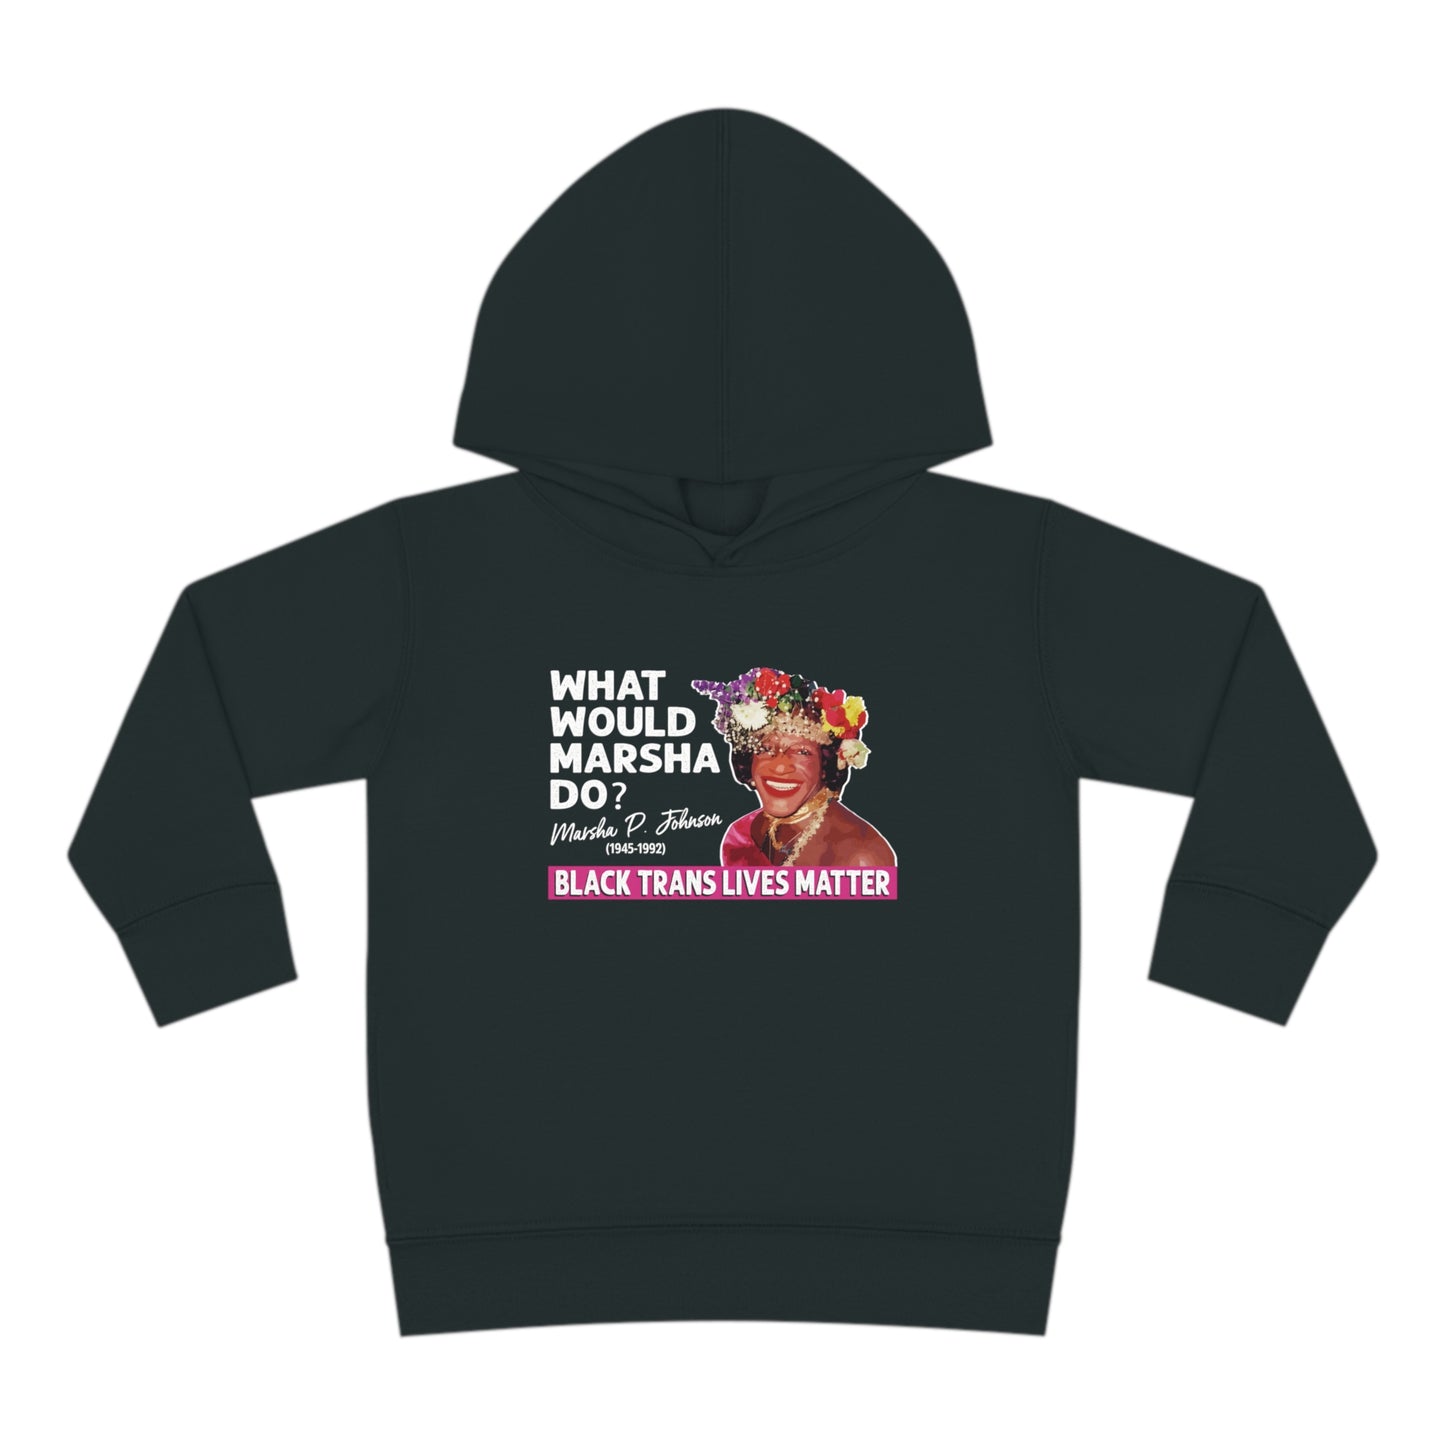 “What Would Marsha Do?” Toddler Hoodie